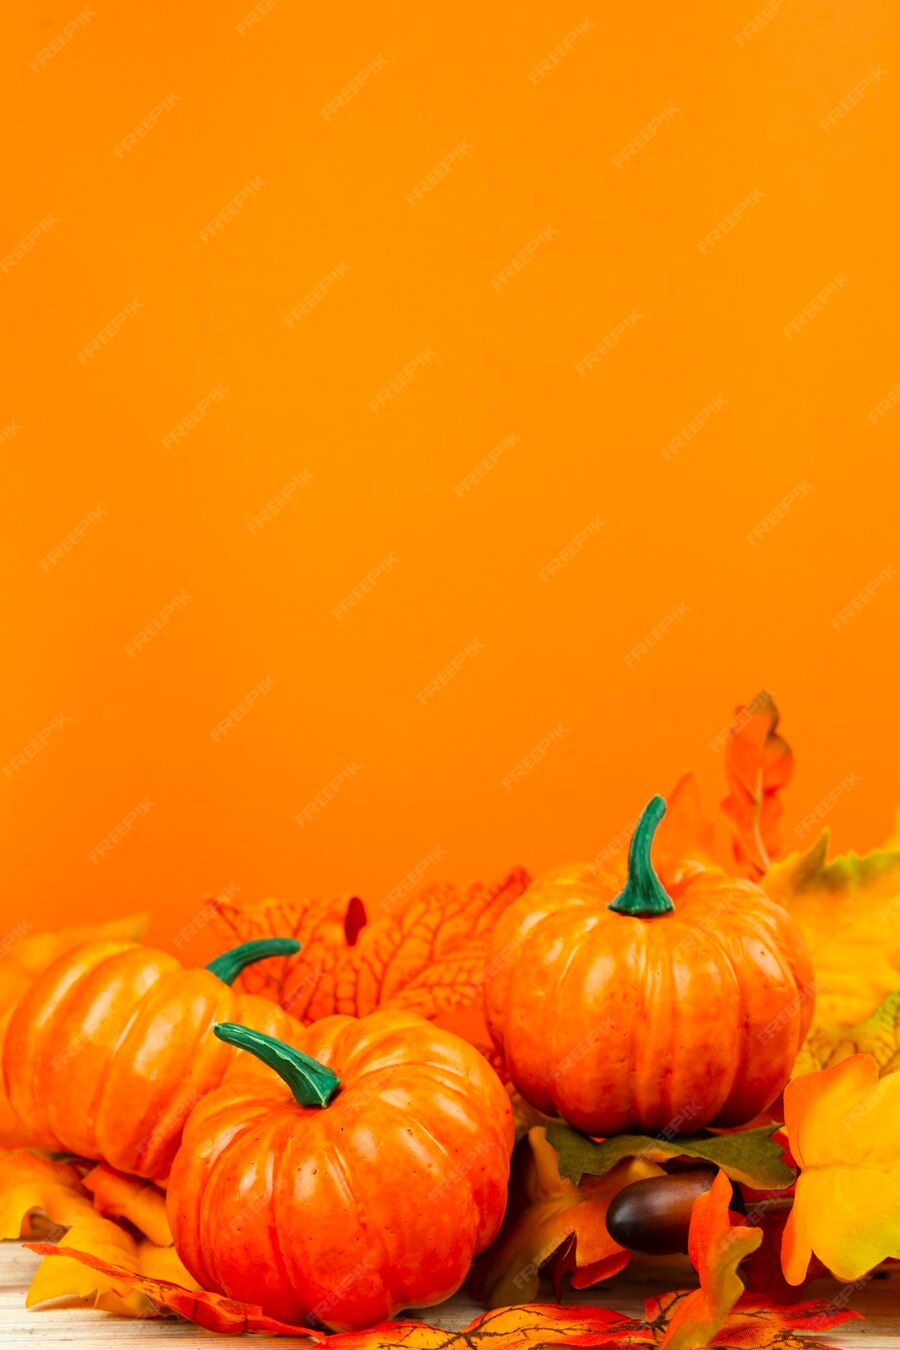 Free Photo | Front view pumpkins with orange background